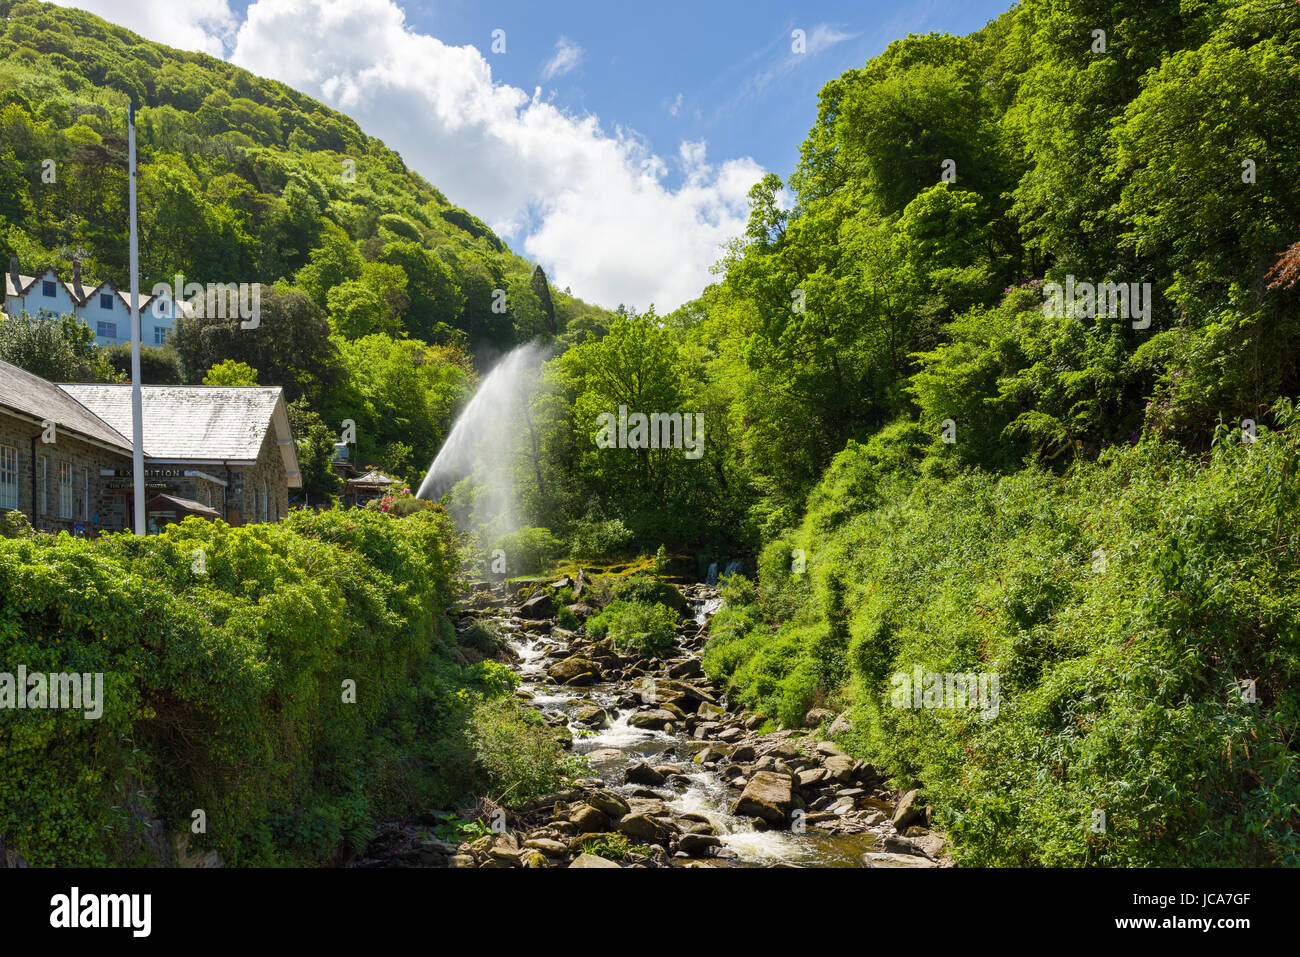 The West Lyn River at Lynmouth on the North Devon coast in Exmoor National park, England. Stock Photo